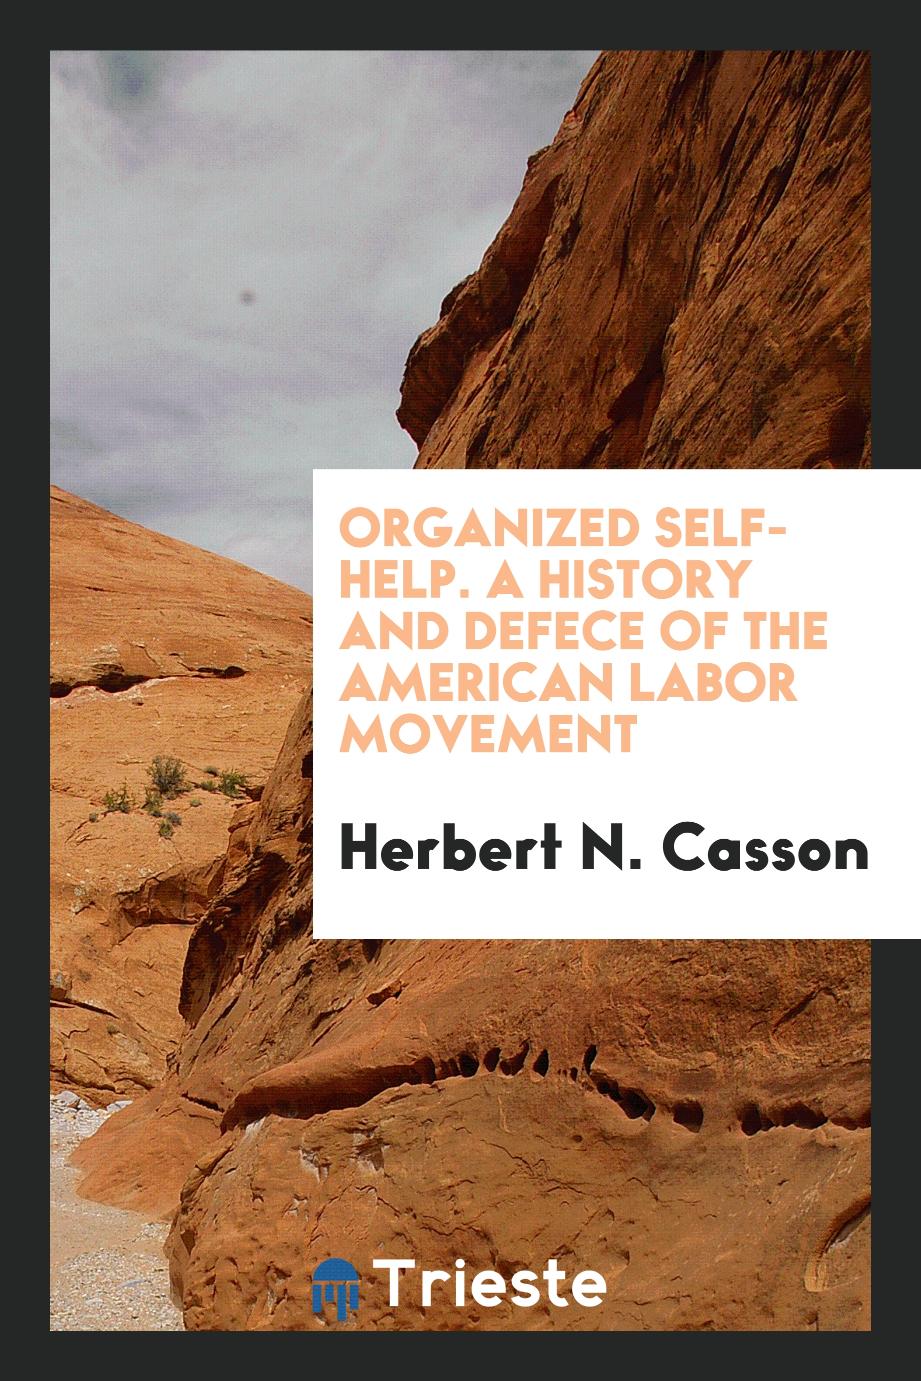 Organized self-help. A history and defece of the American labor movement